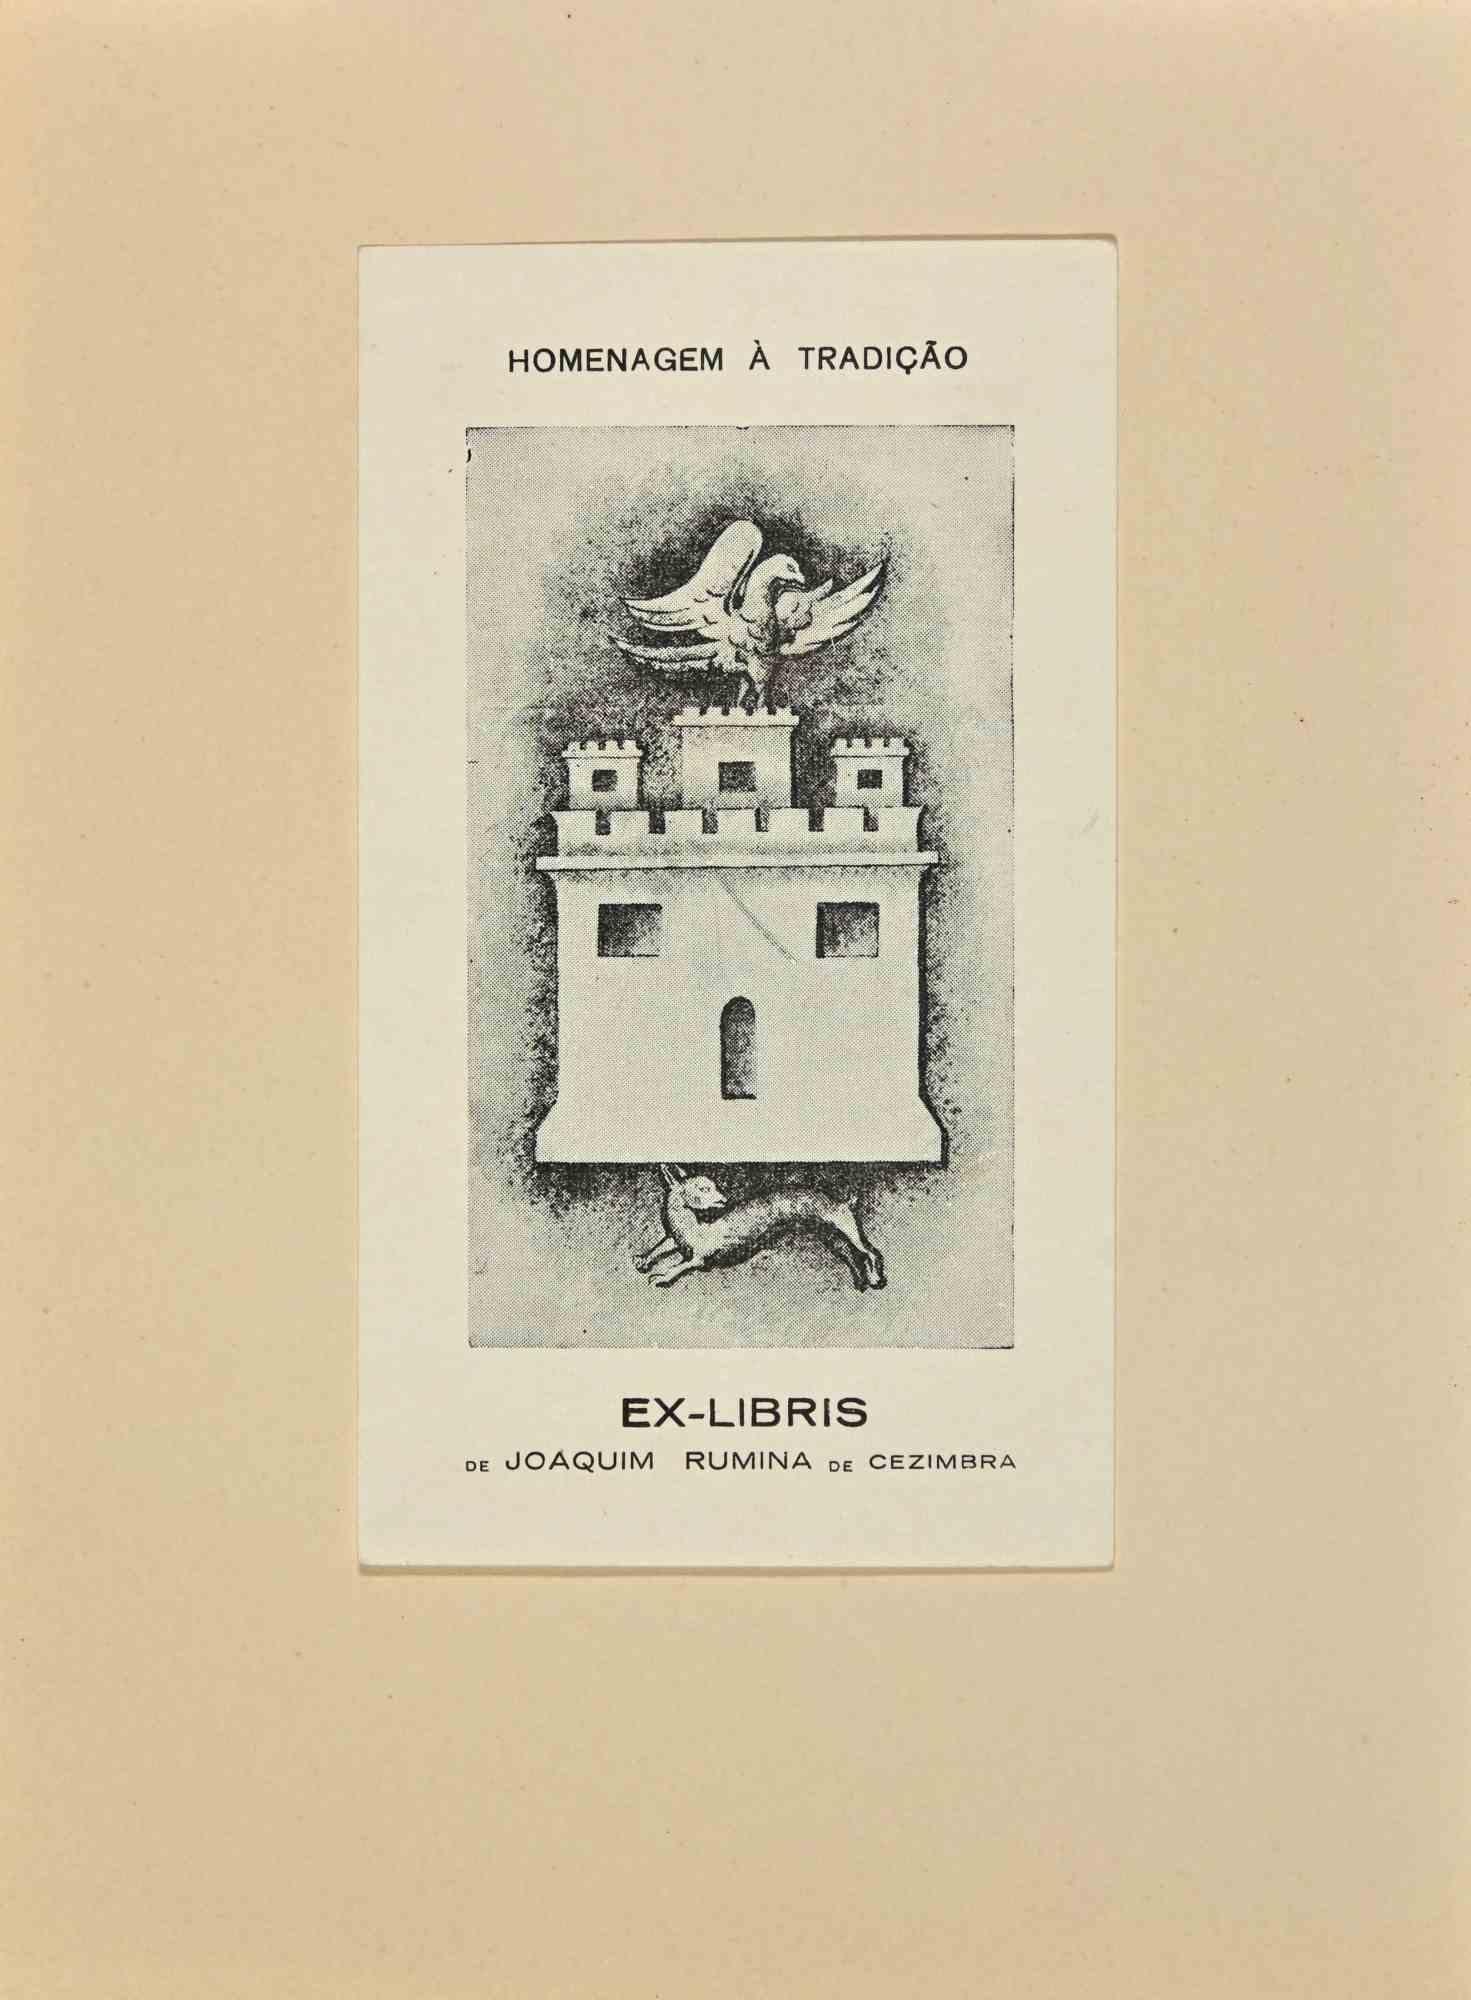 Ex Libris  - Joaquim Rumina De Cezimbra is a Modern Artwork realized in early  20th Century, by Joaquim Rumina De Cezimbra.

Ex Libris. B/W woodcut on ivory paper. 

The work is glued on ivory cardboard.

Total dimensions: 20x 15 cm.

Good